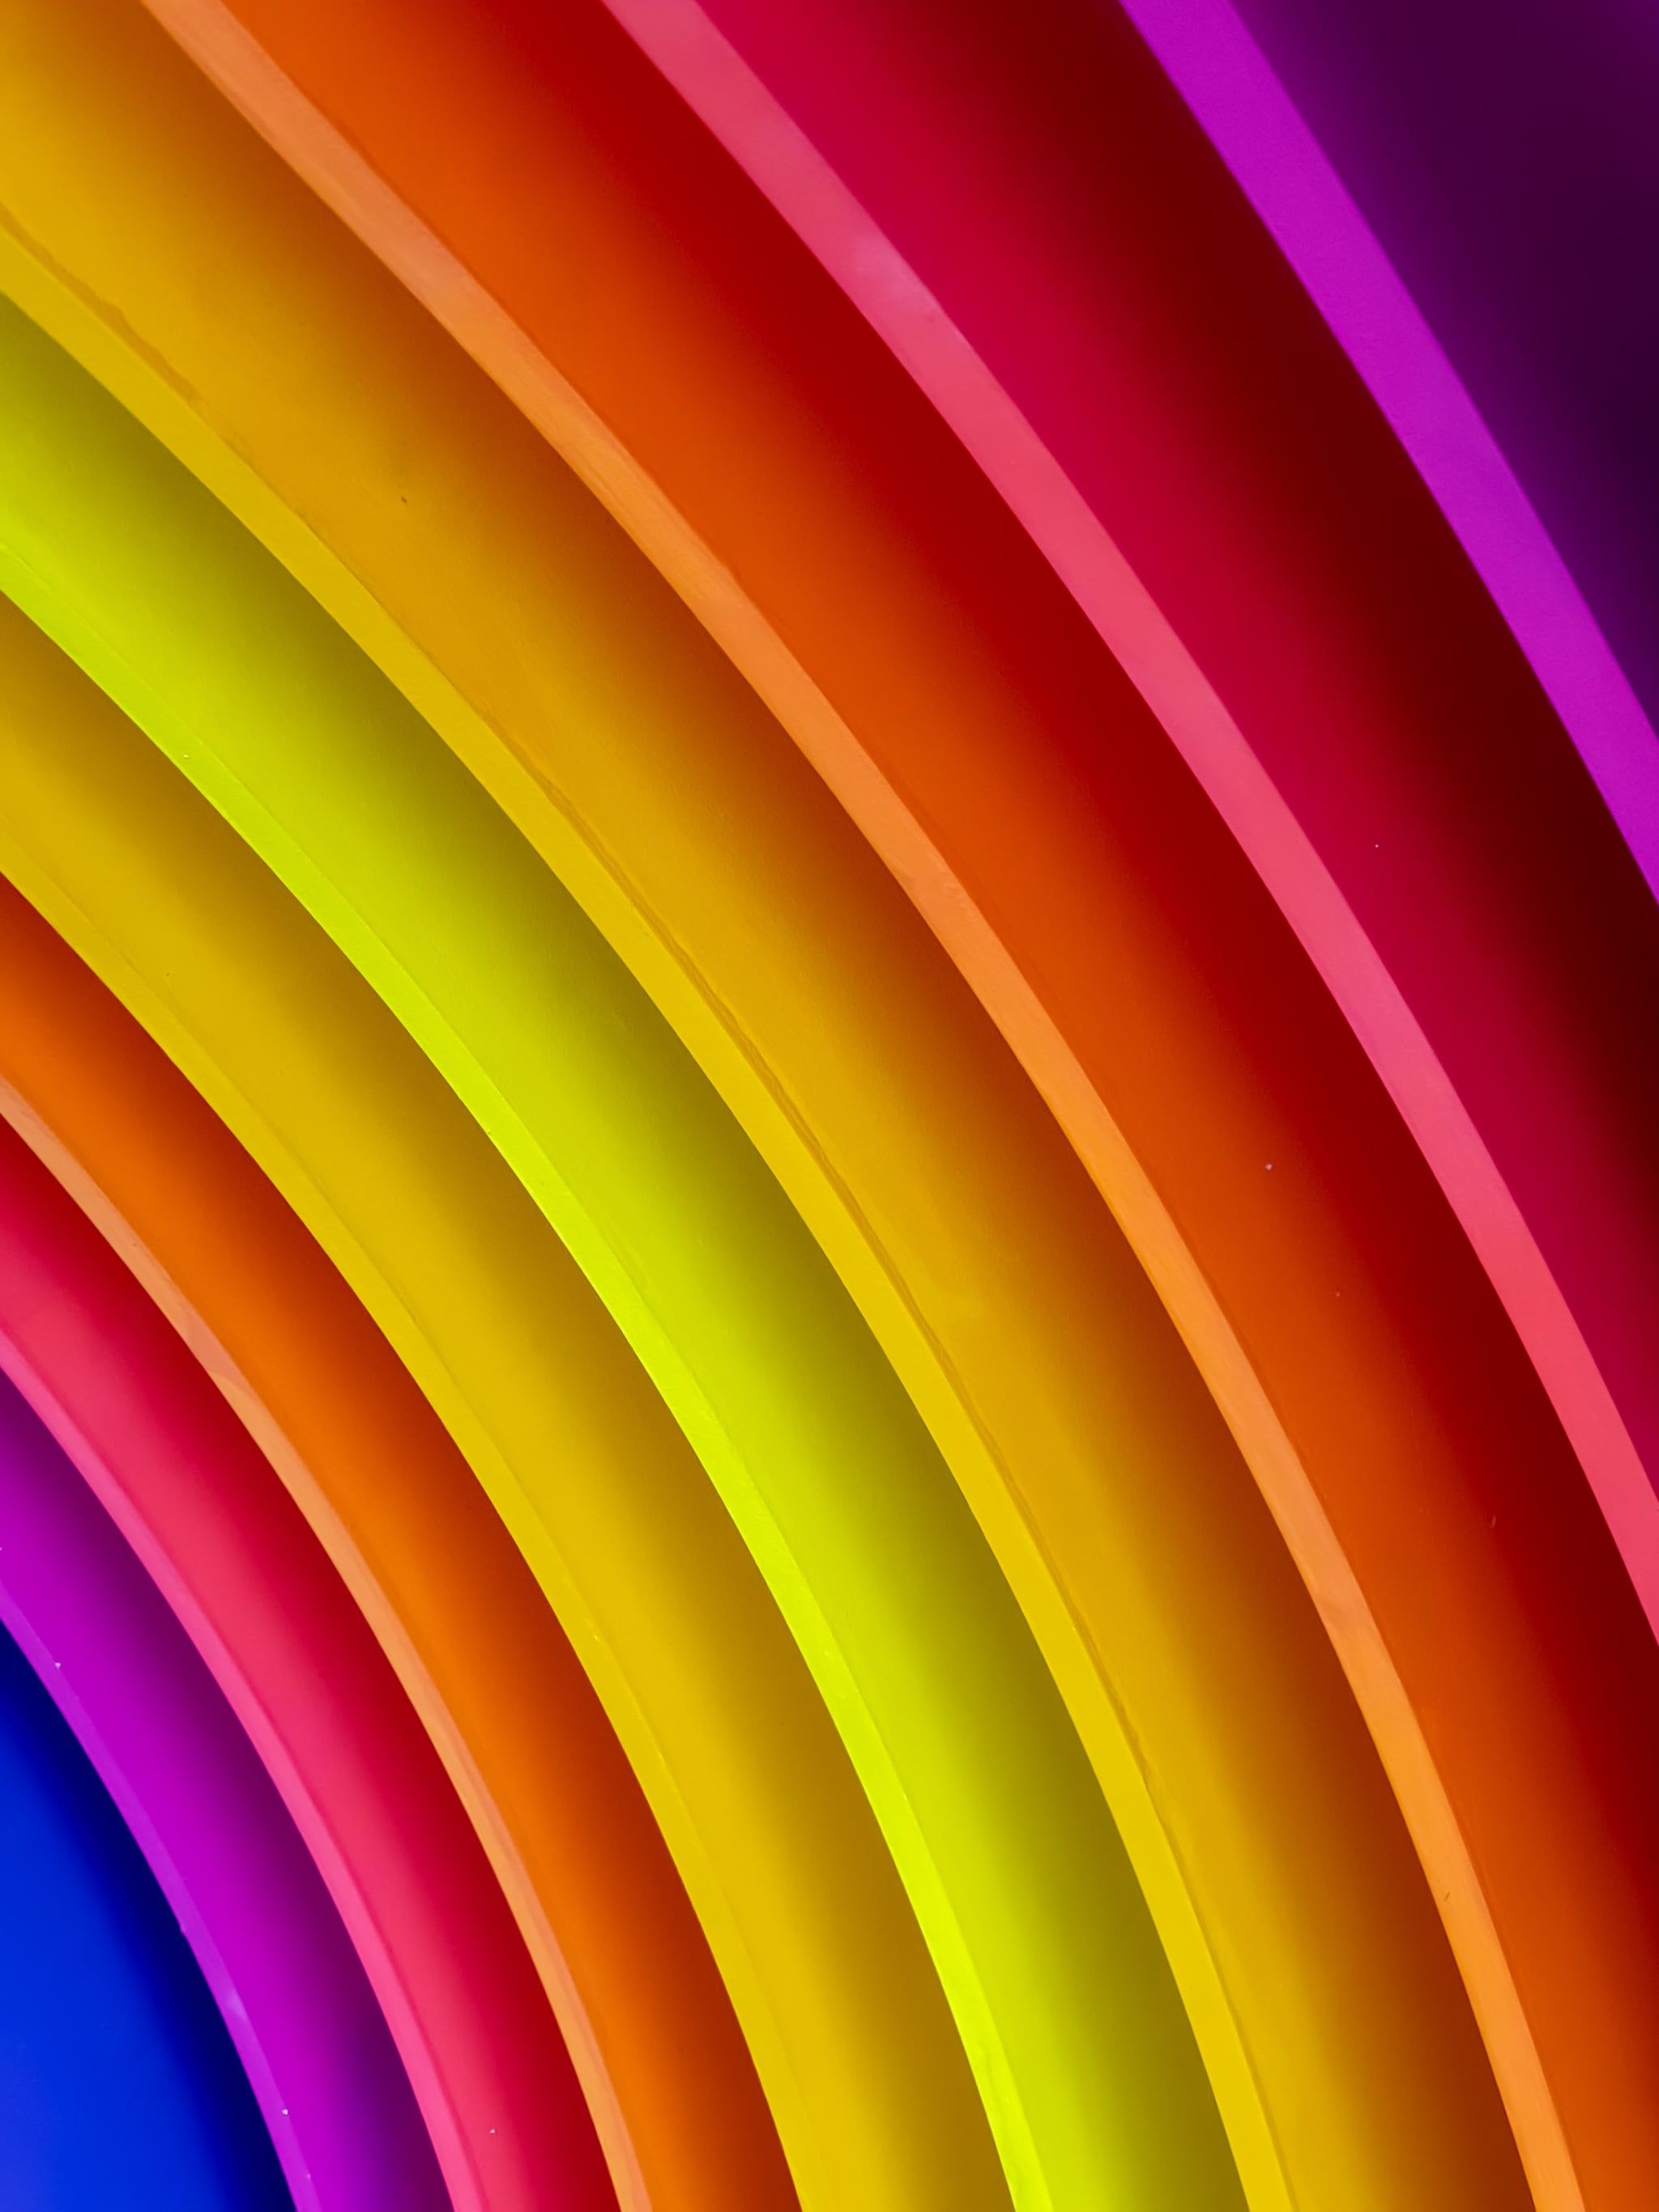 Neon Rainbow iPhone Wallpaper. The Best iOS 14 Wallpaper Ideas That'll Make Your Phone Look Aesthetically Pleasing AF